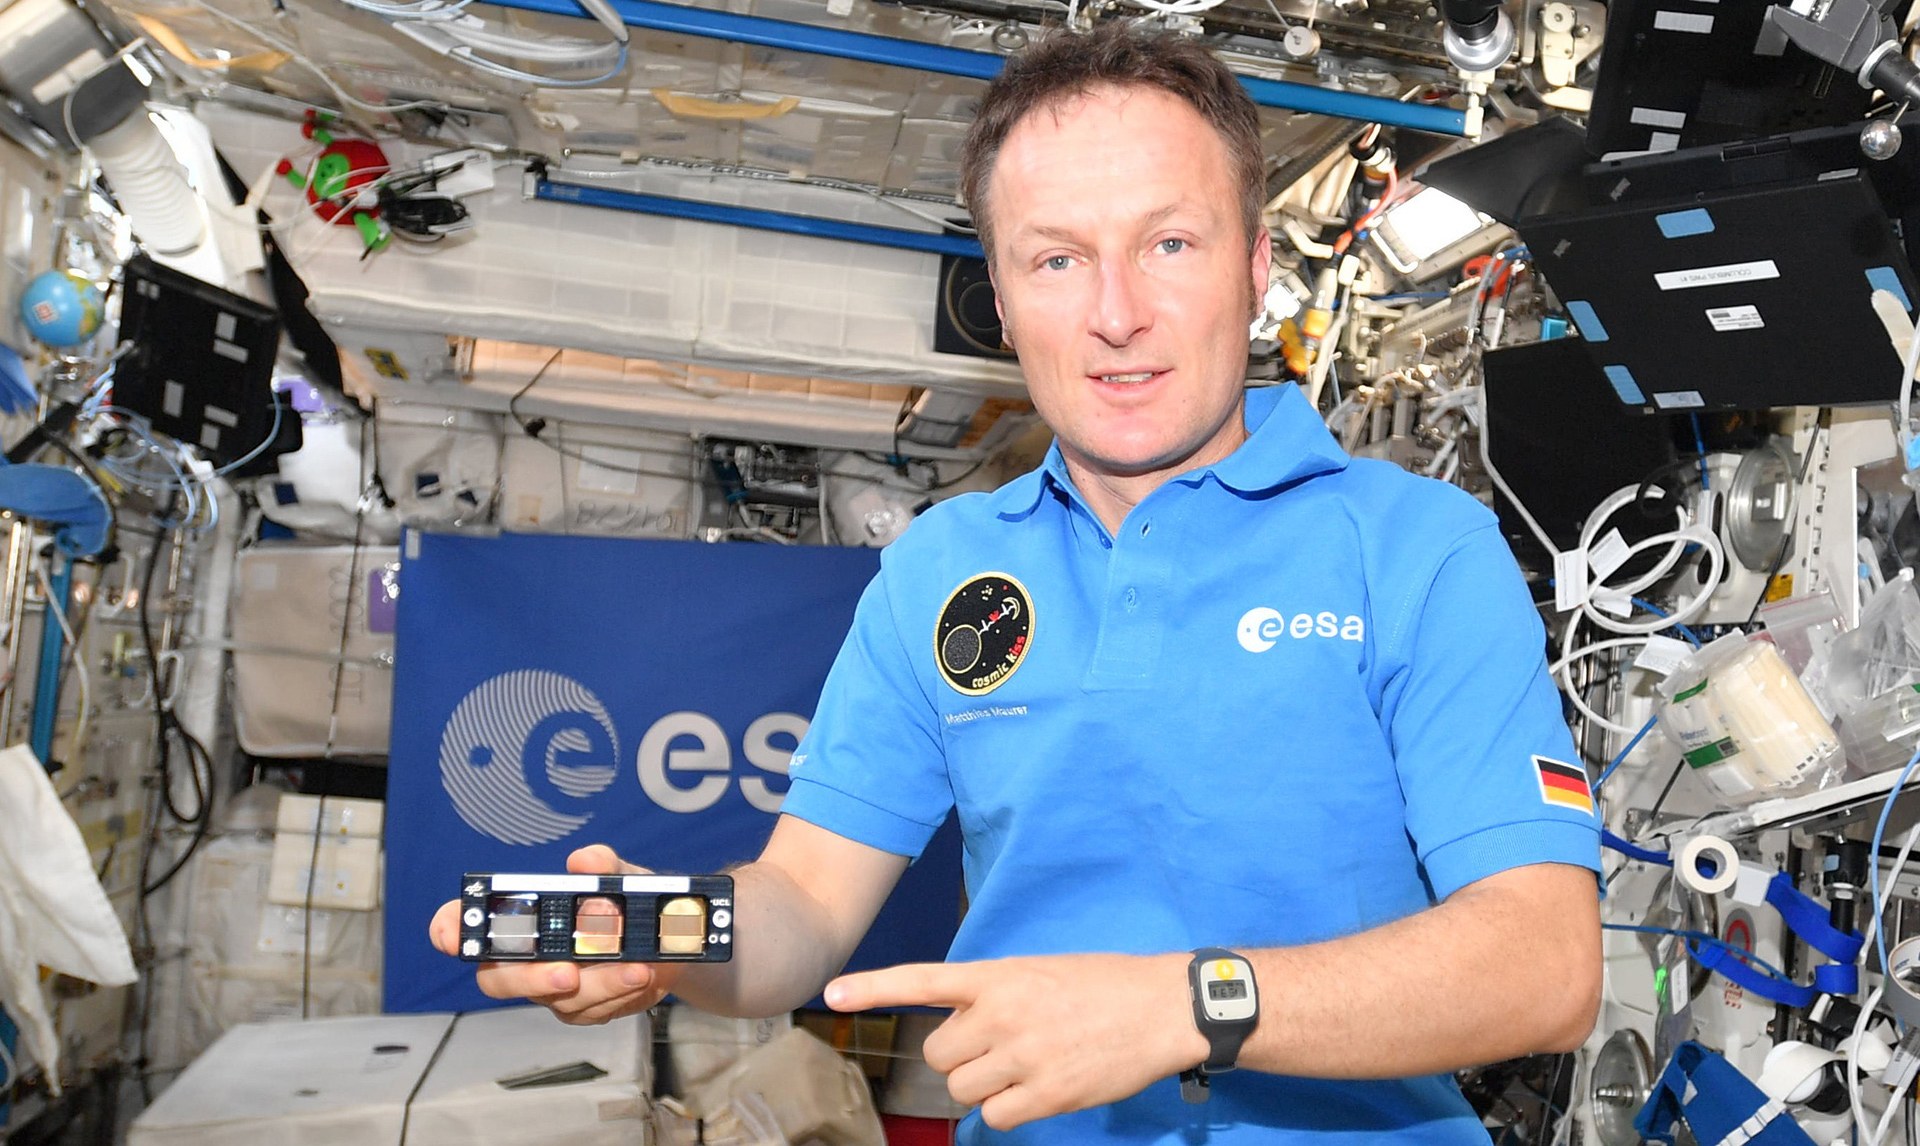 Tracking down microbial contamination on the ISS